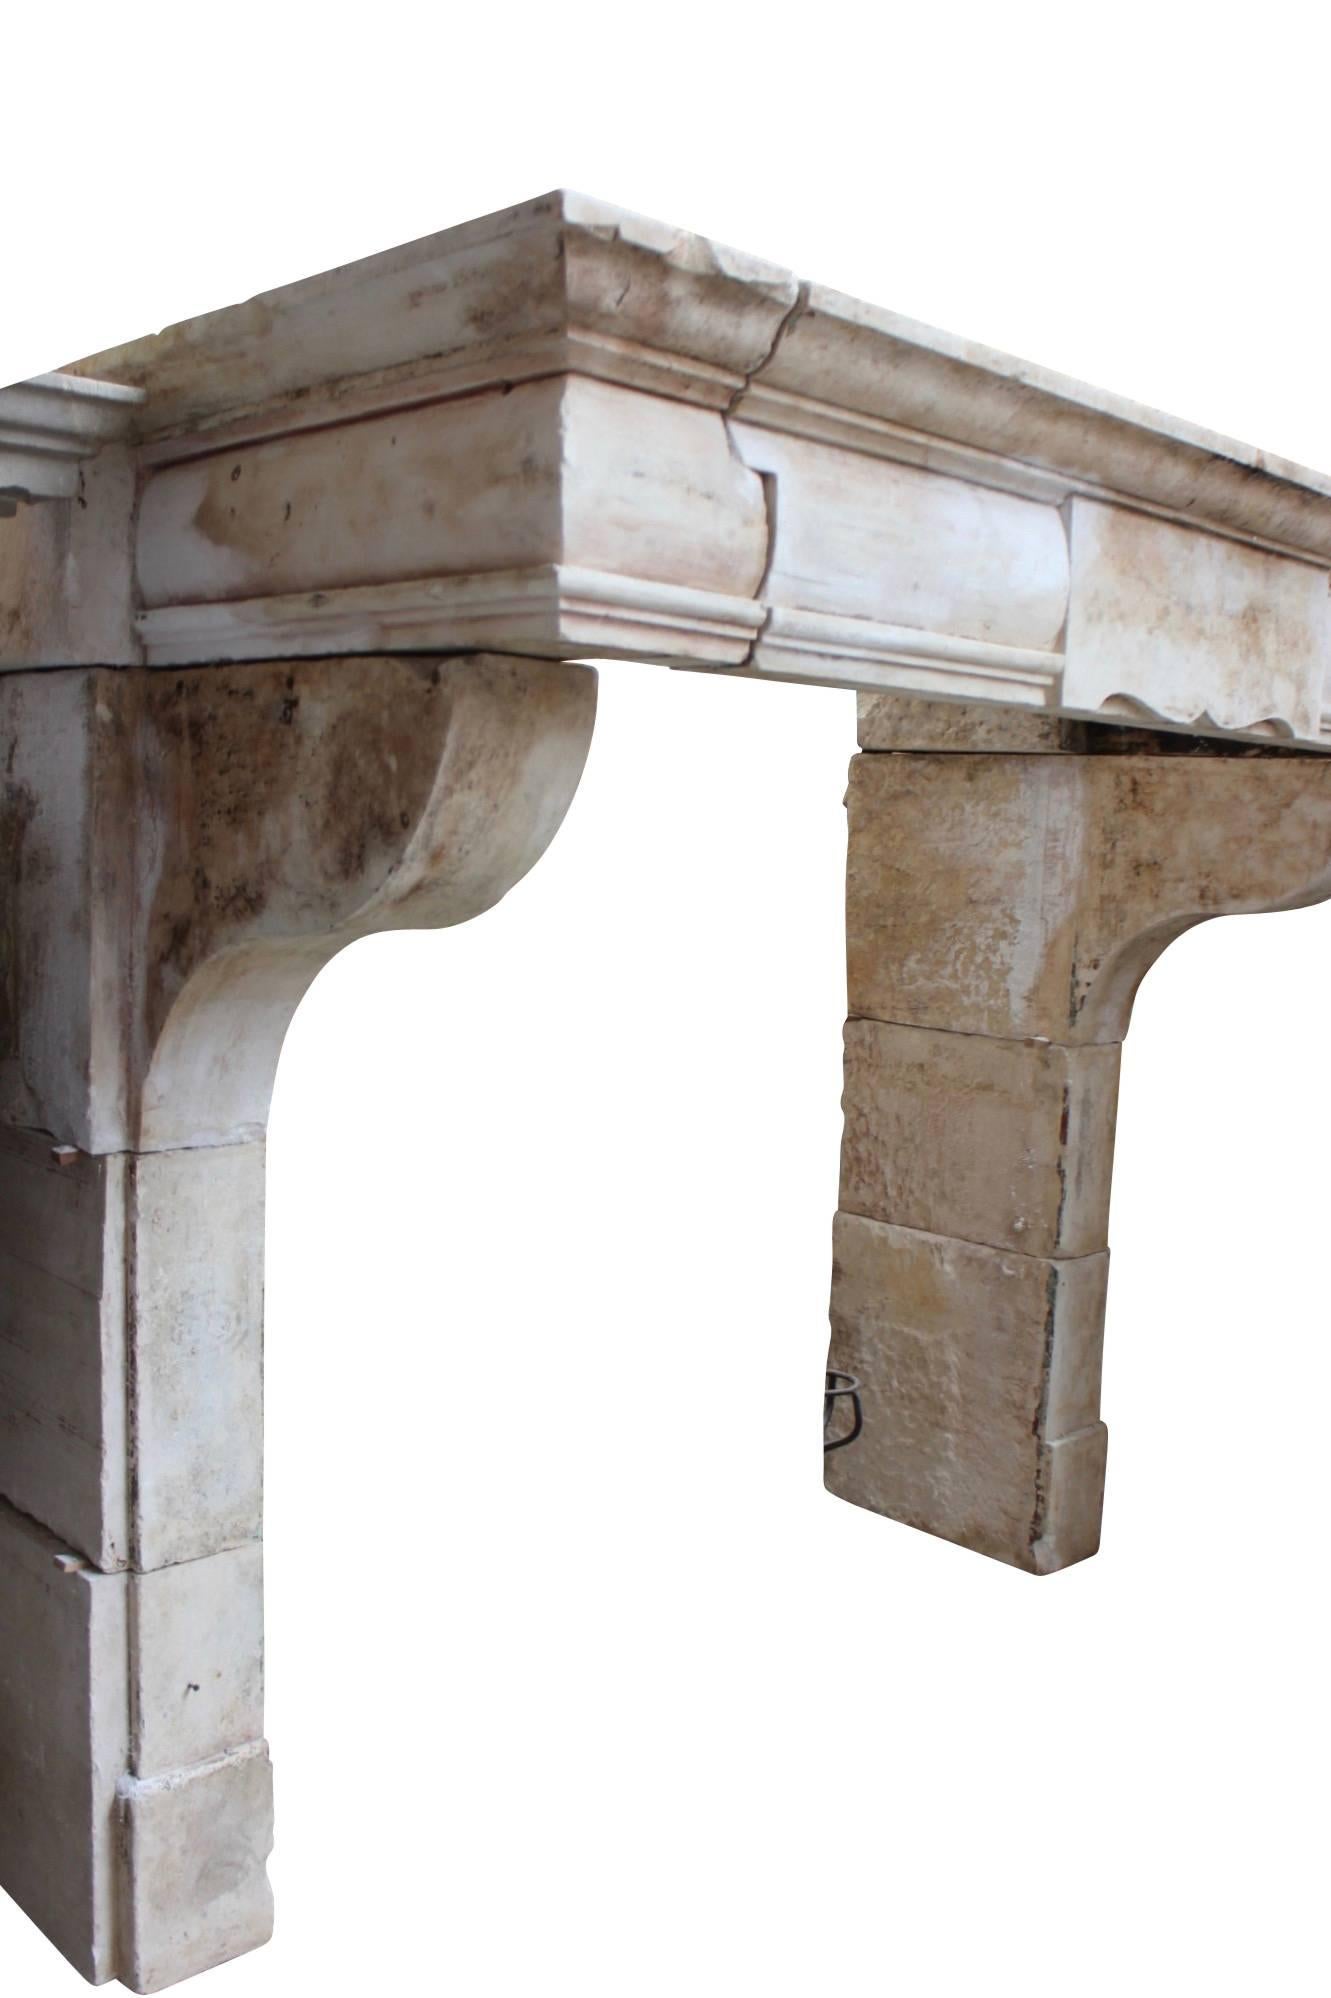 This rather clean and elegant limestone LXIII period fireplace surround has a center panel. The front is is round. Again this one is in a perfect condition and a fit for many interior design types. A fireplace mantel in which one can stand. Could be